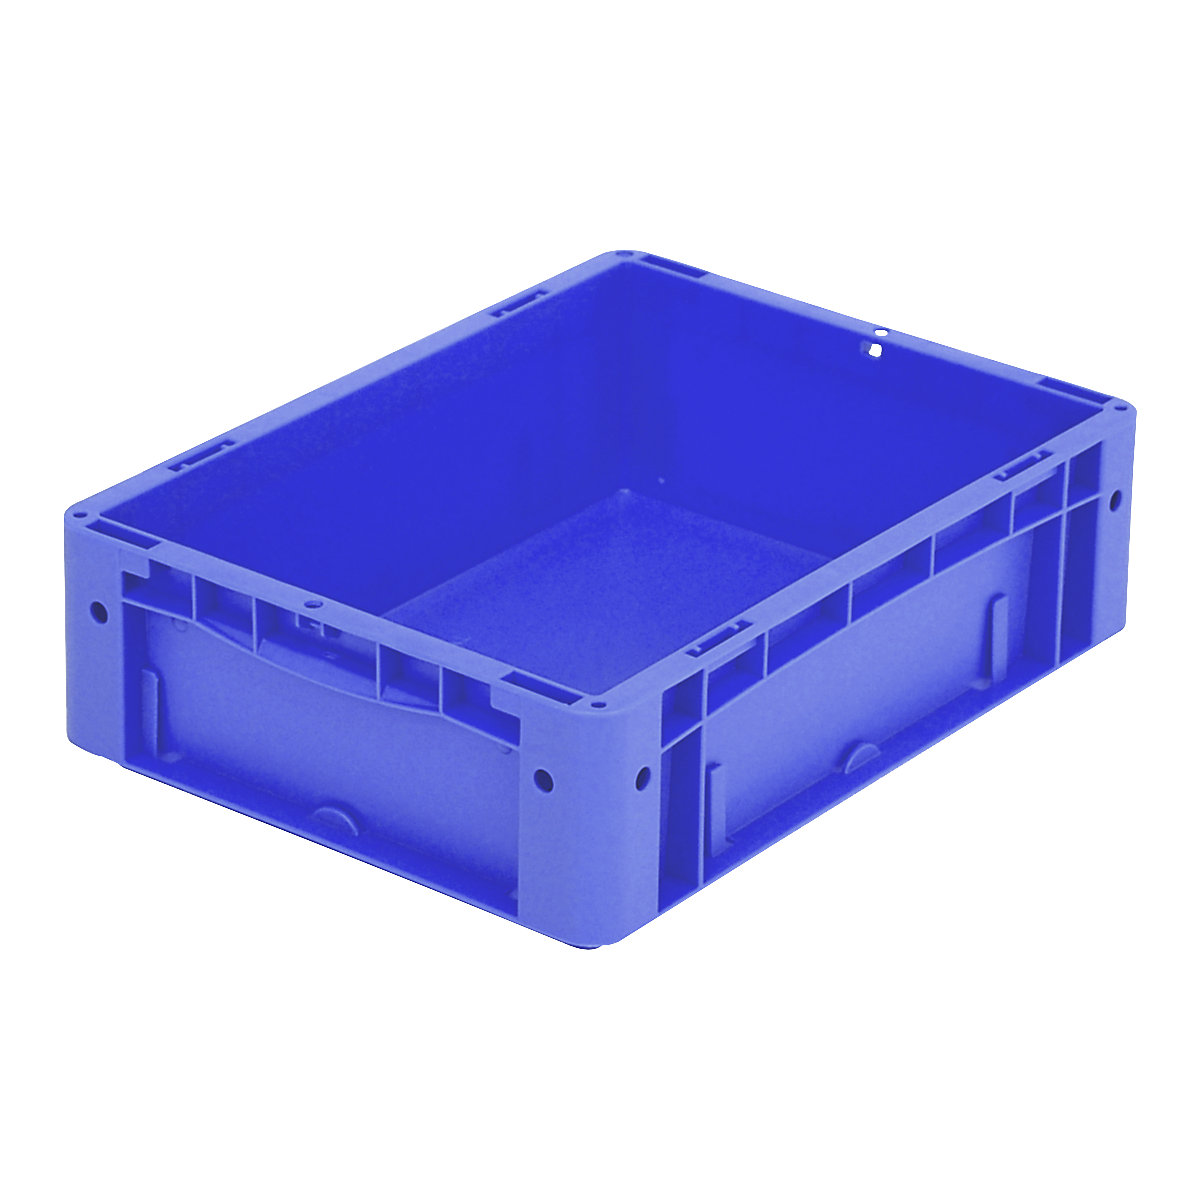 XL Euro stacking container – BITO, standard model, LxWxH 400 x 300 x 120 mm-19